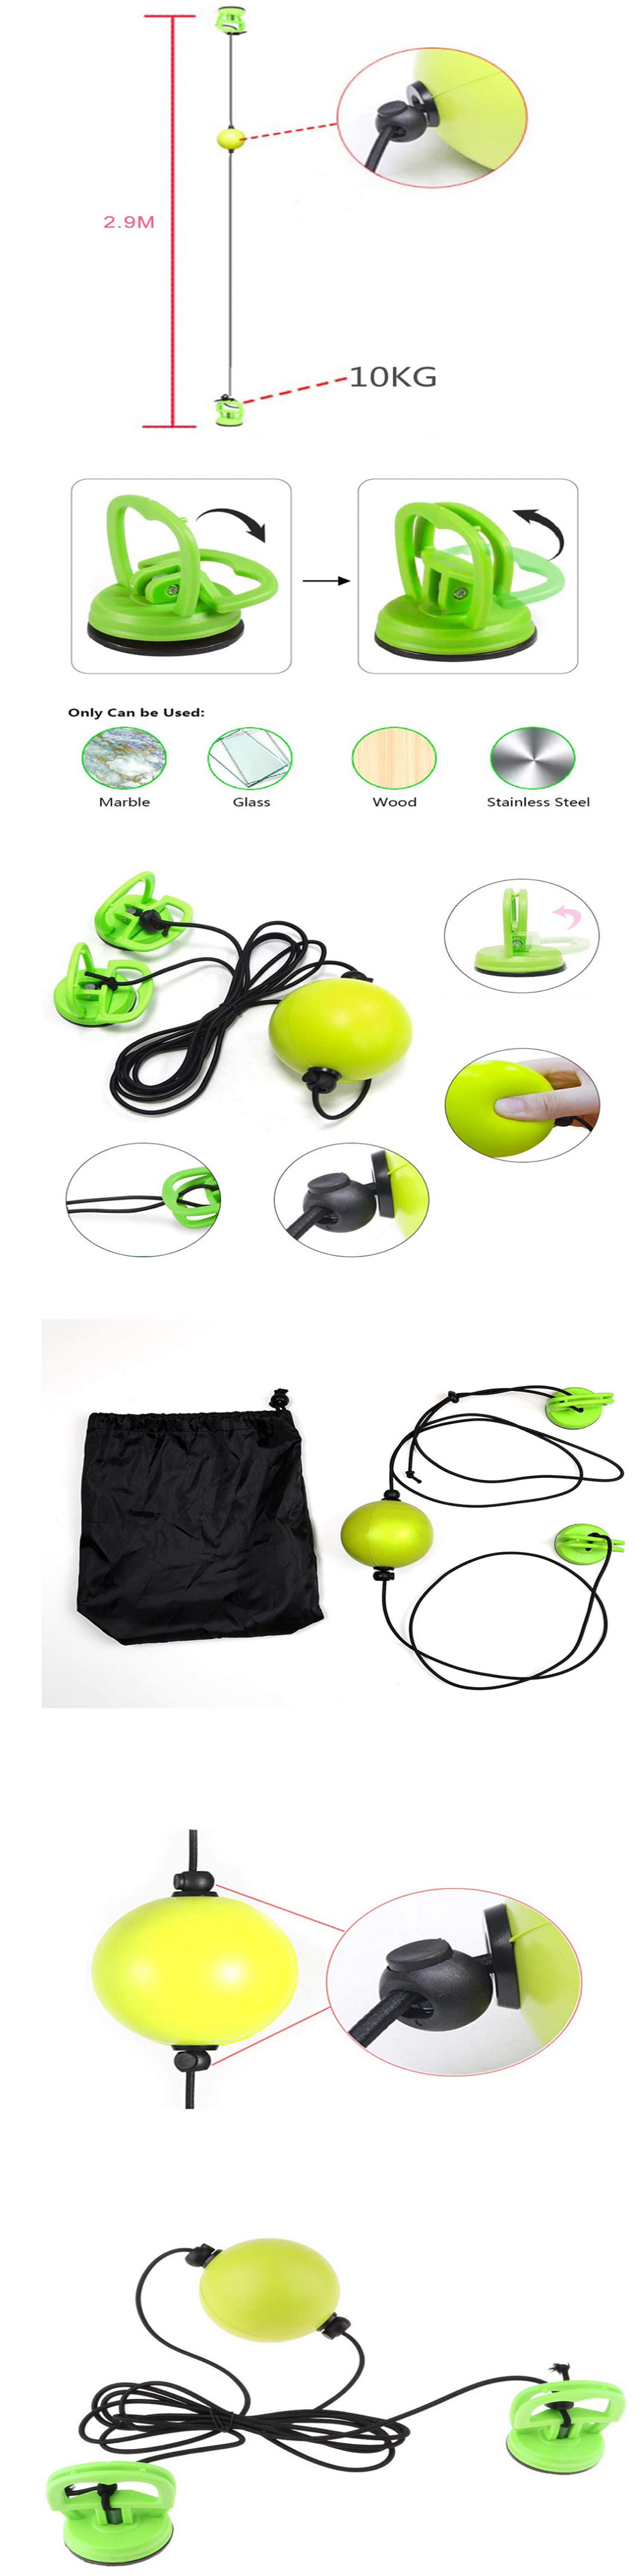 KALOAD-10CM-Adjustable-Suction-Cup-Suspension-Boxing-Ball-Suspension-Combat-Ball-Fitness-Physical-Tr-1836460-2